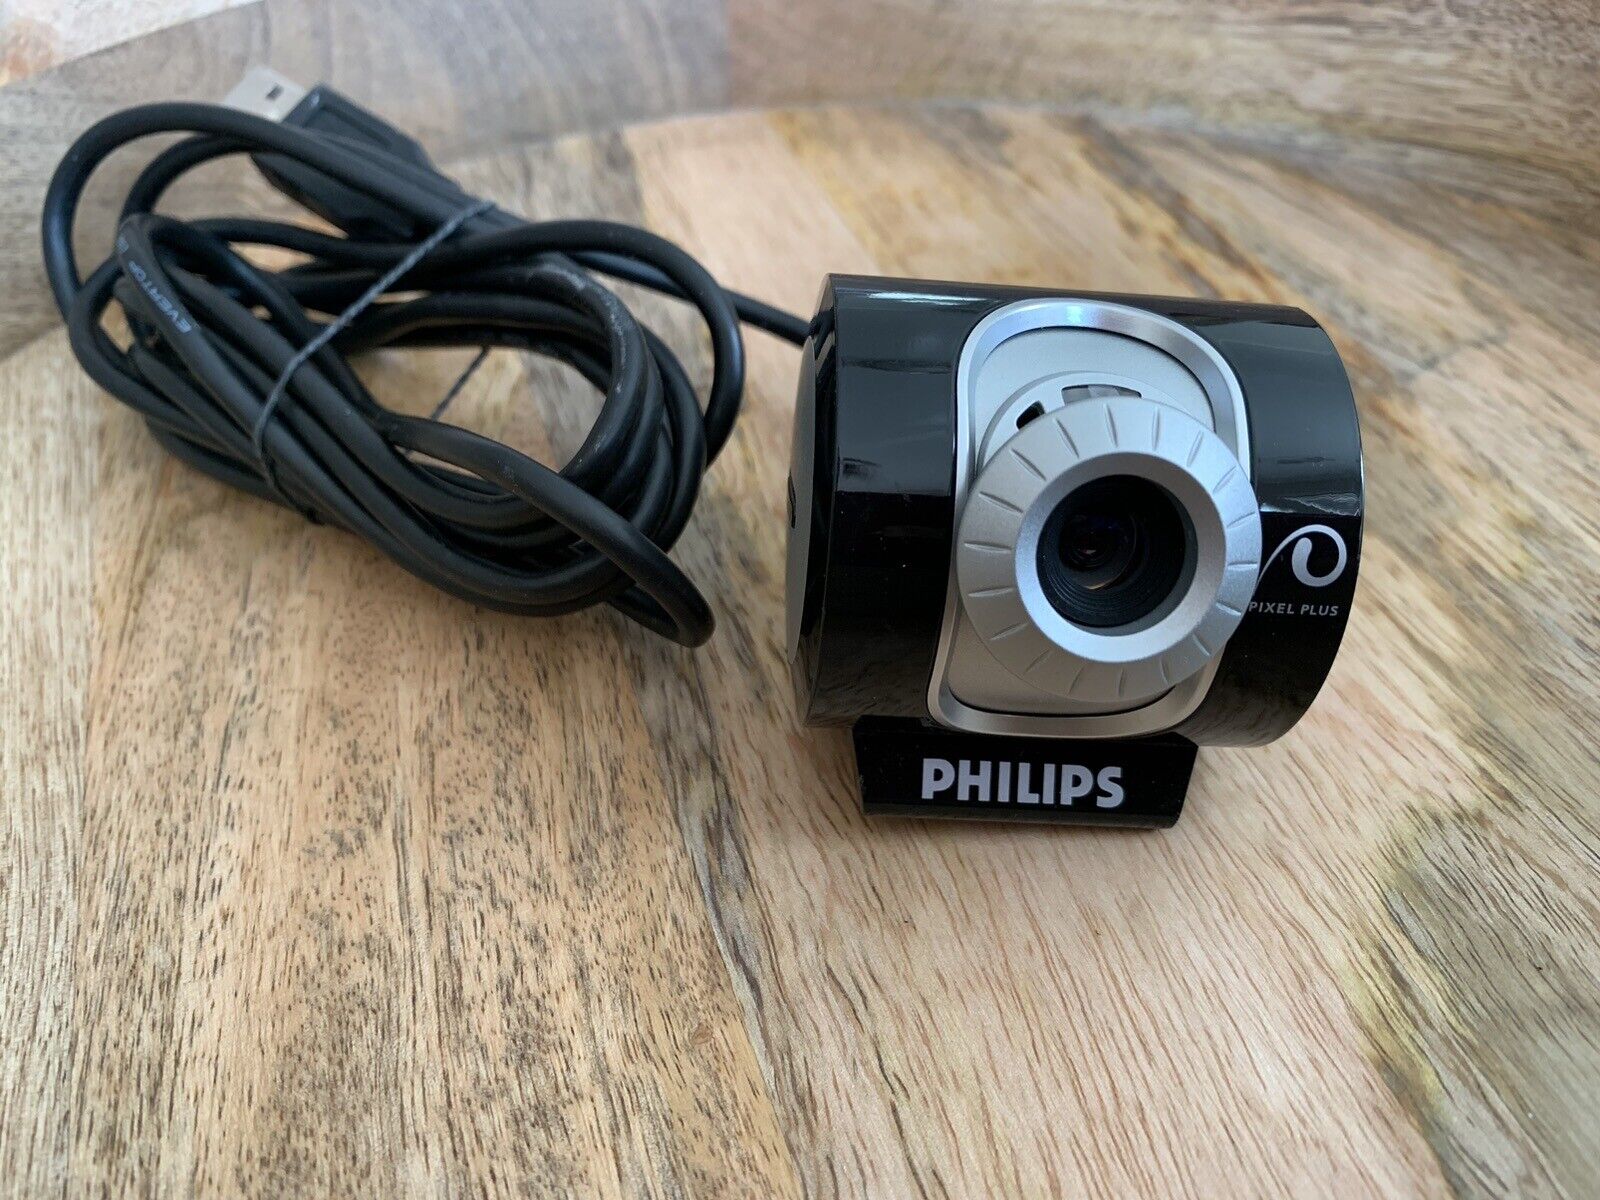 Phillips Camera For Computers